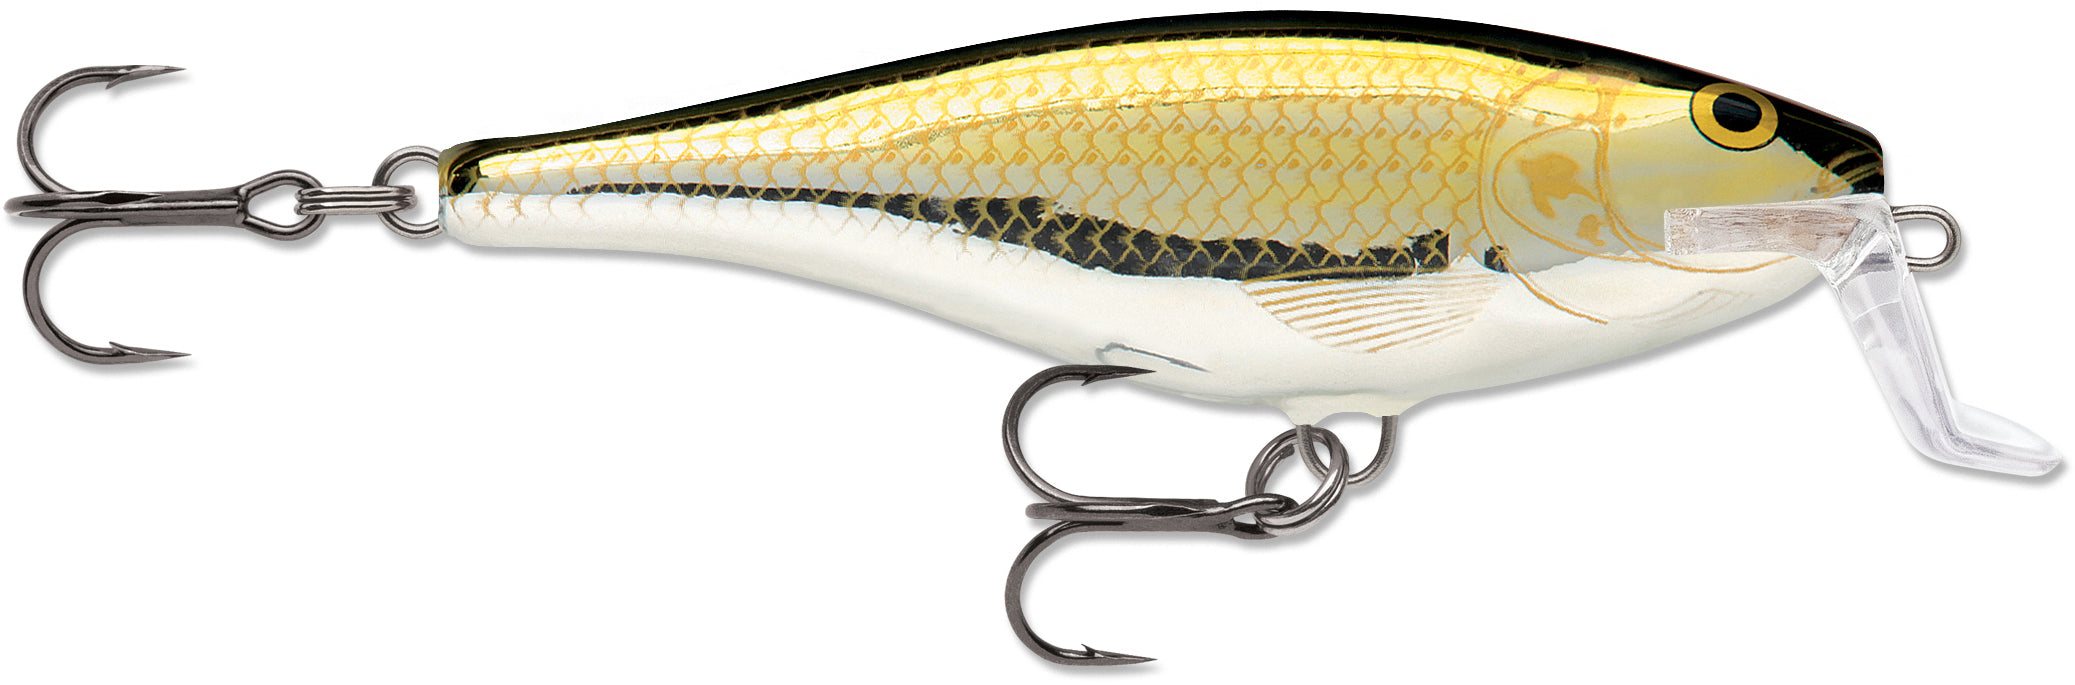 Saltwater & Freshwater Wood Fishing Lure kits from Salty's